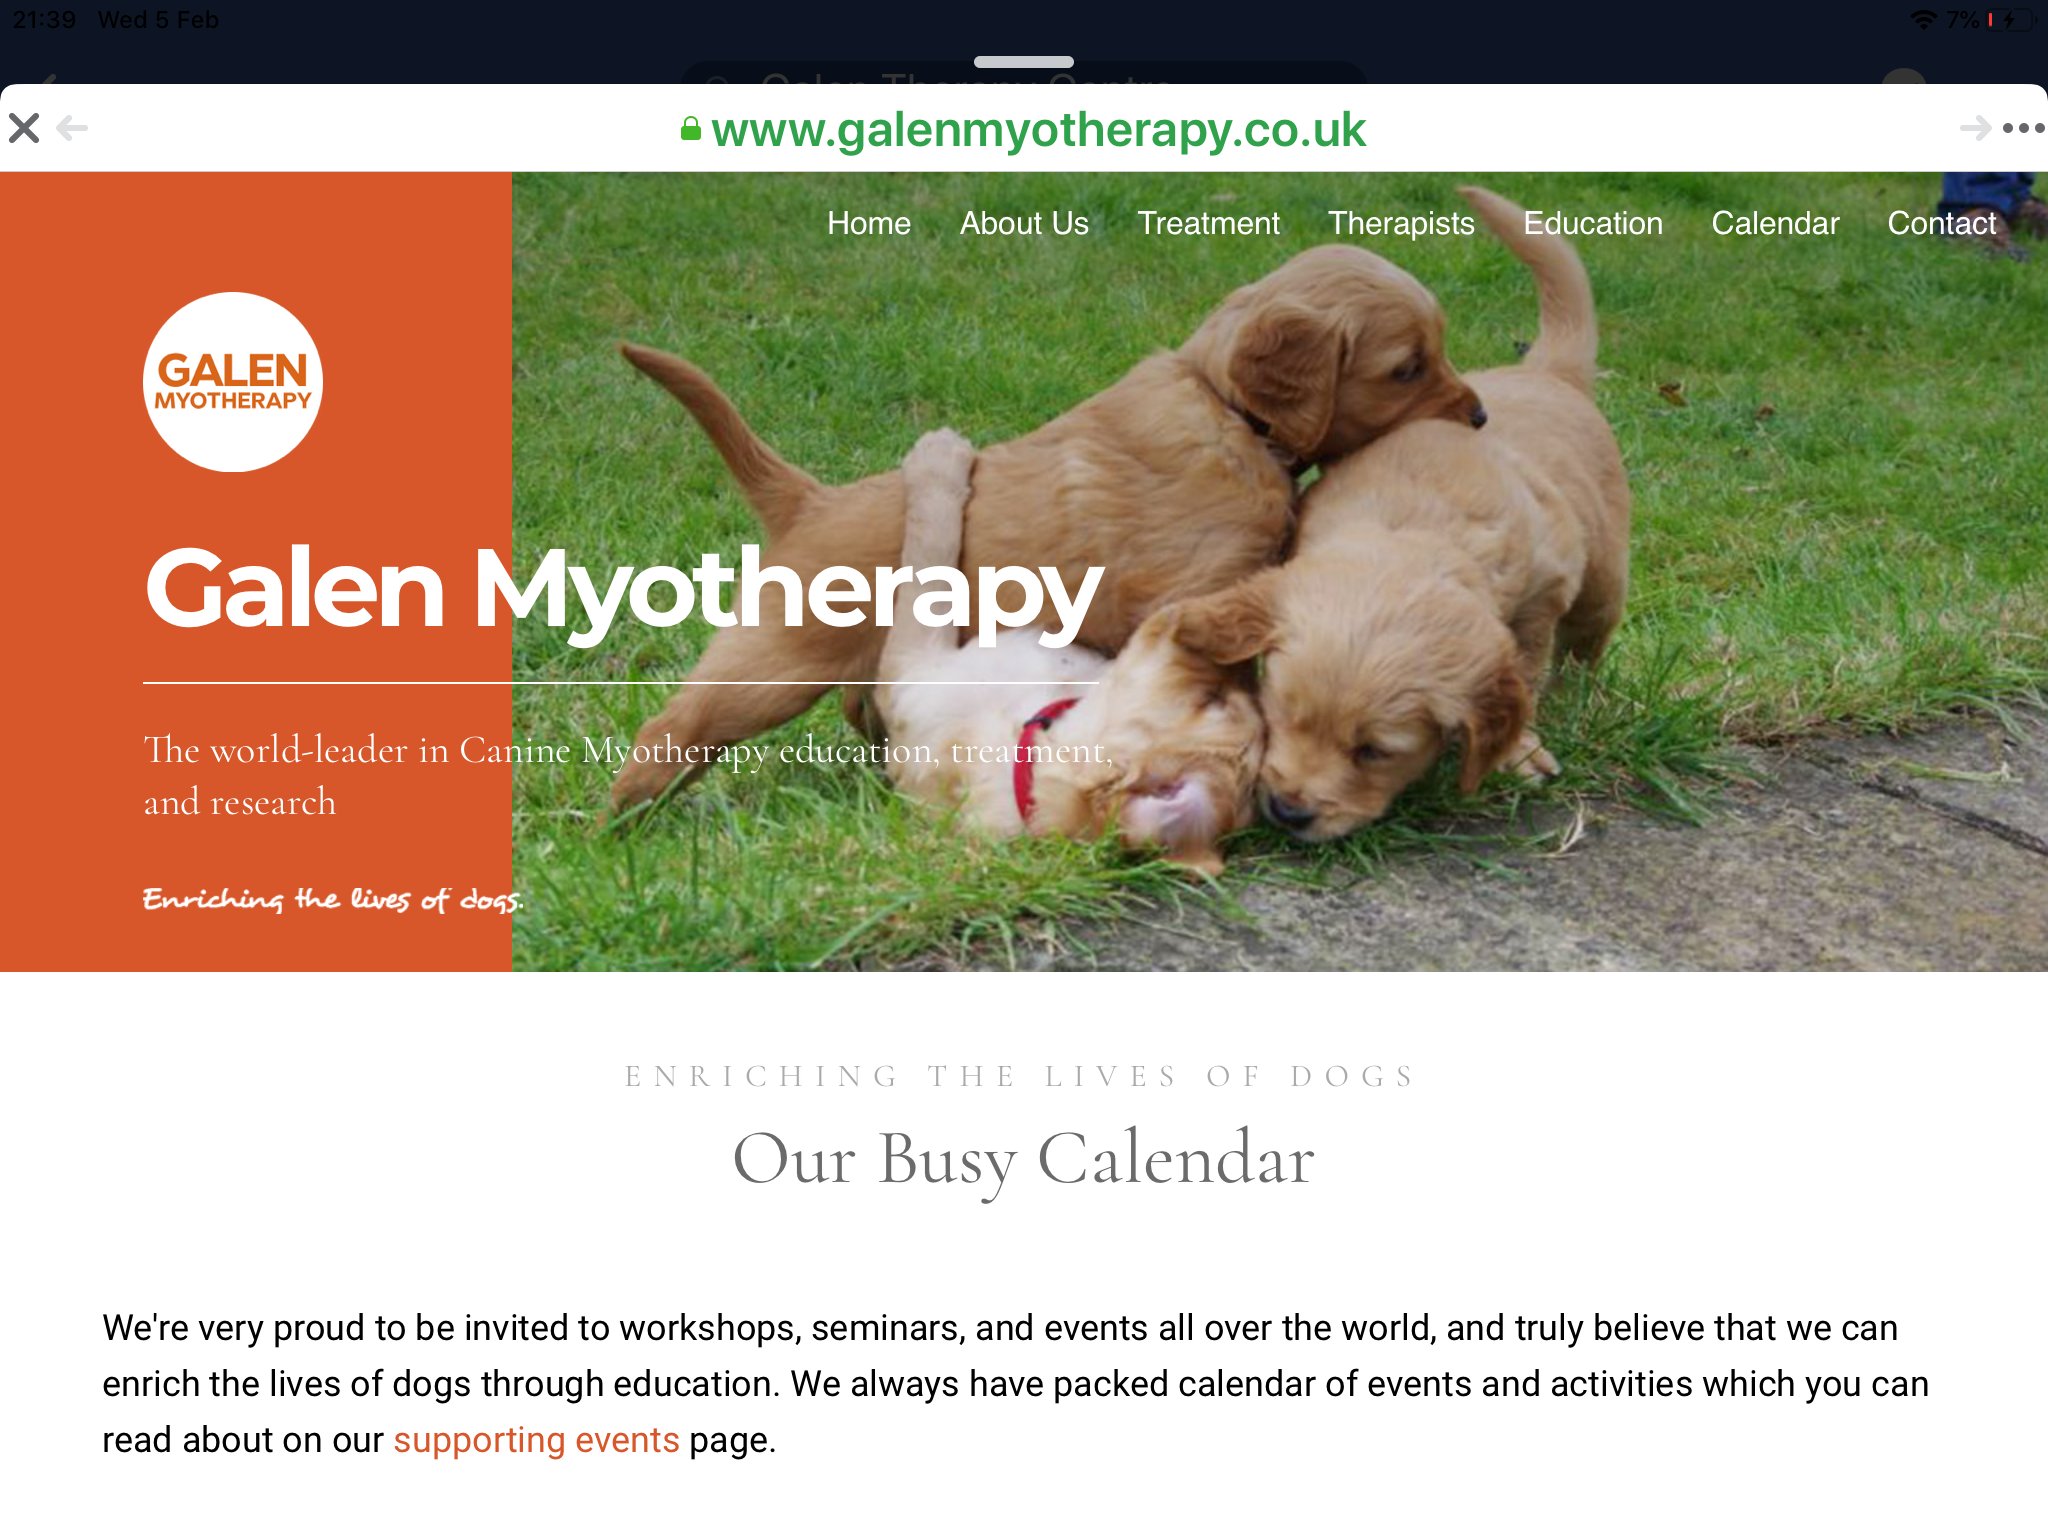 myotherapy dogs